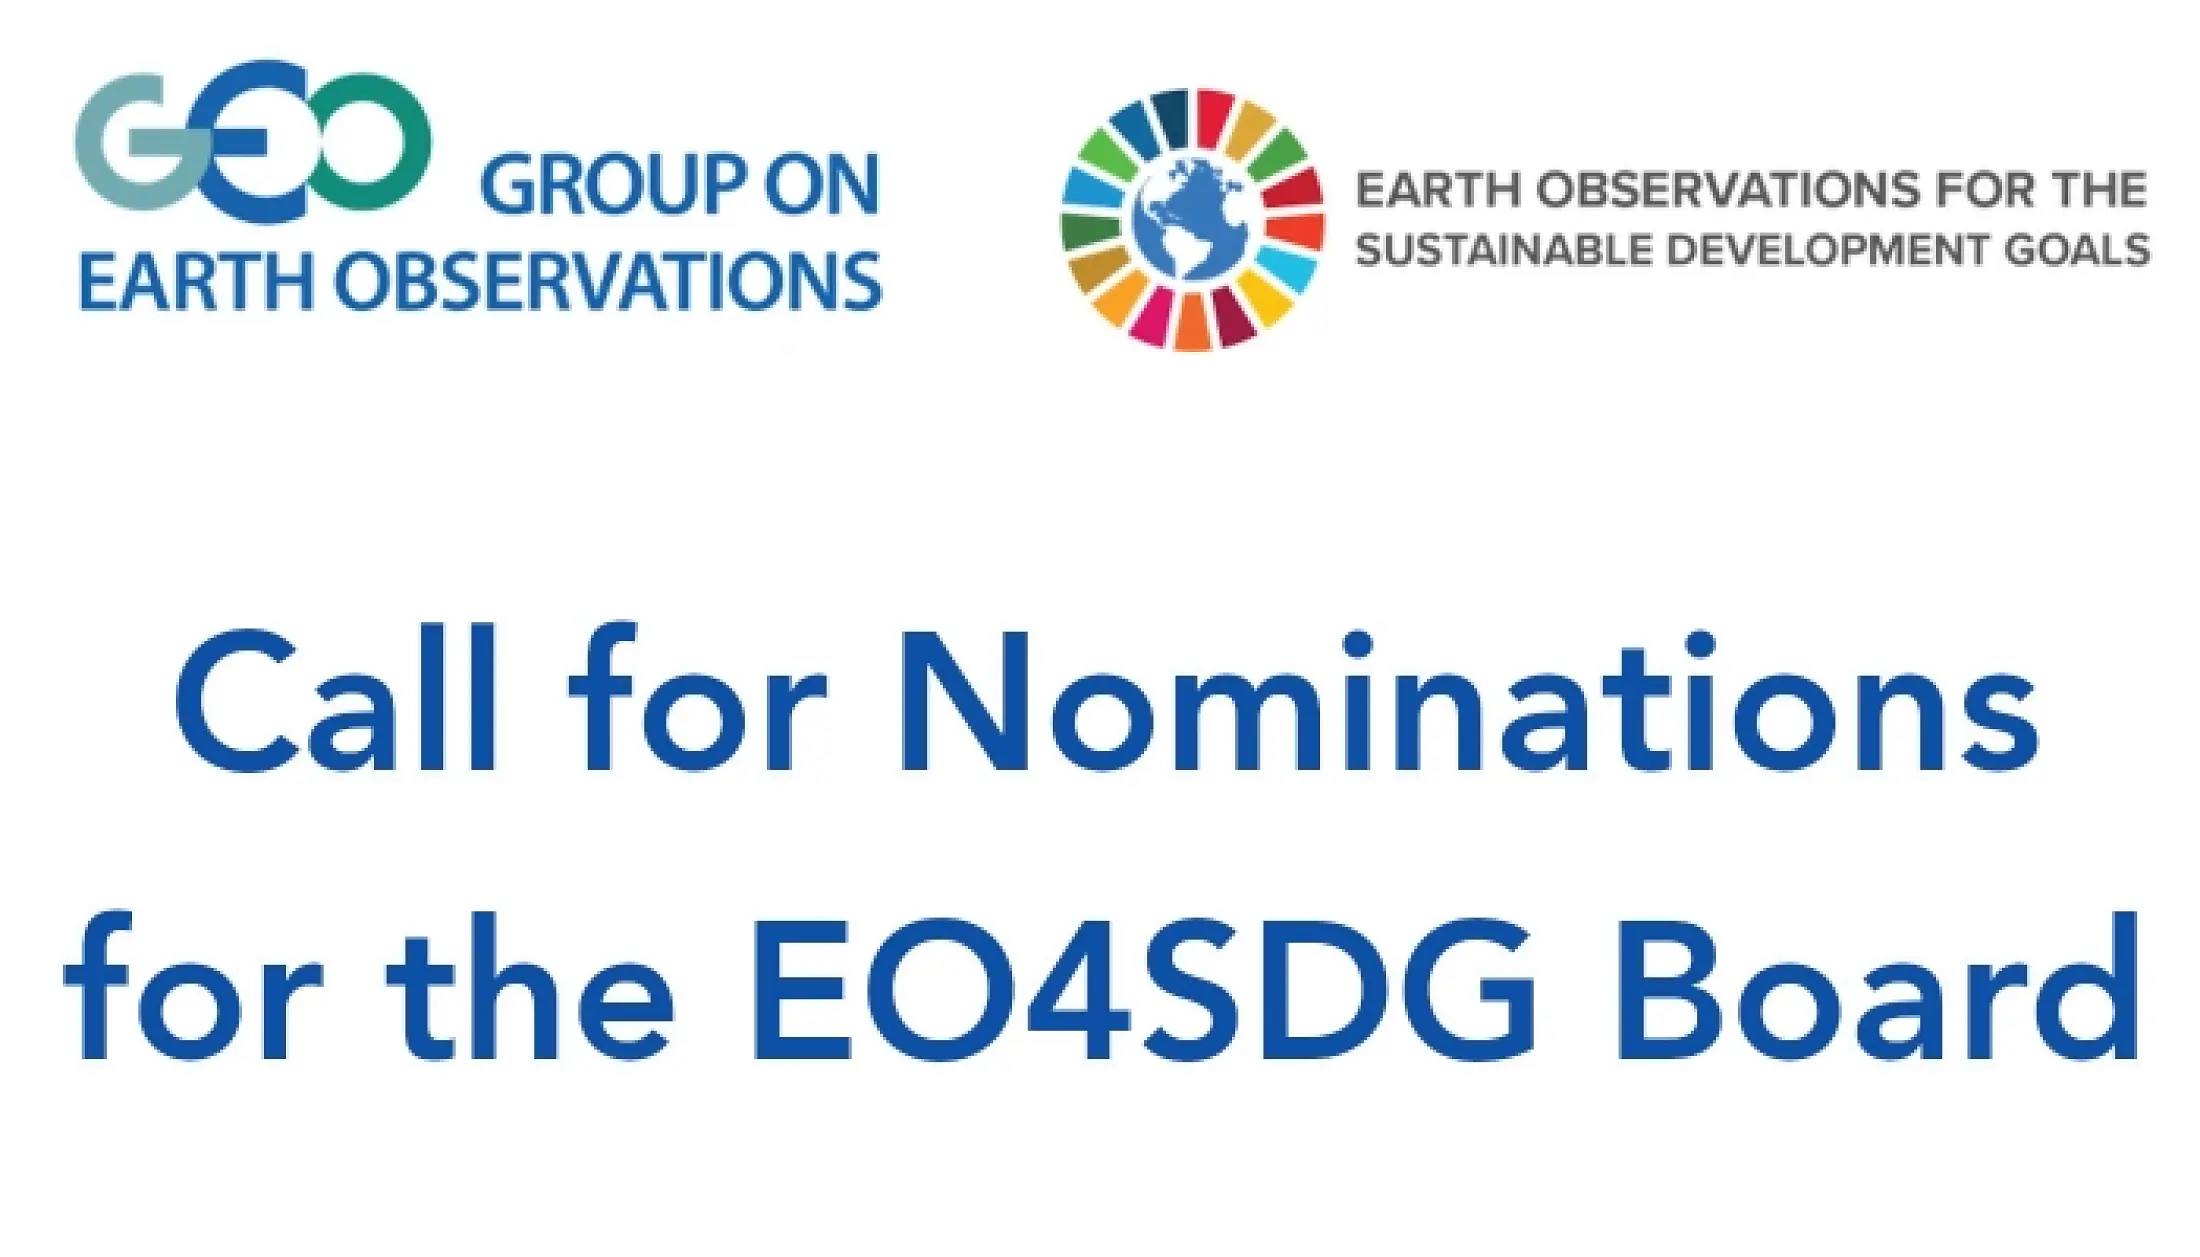 Call for Nominations for the EO4SDG Board